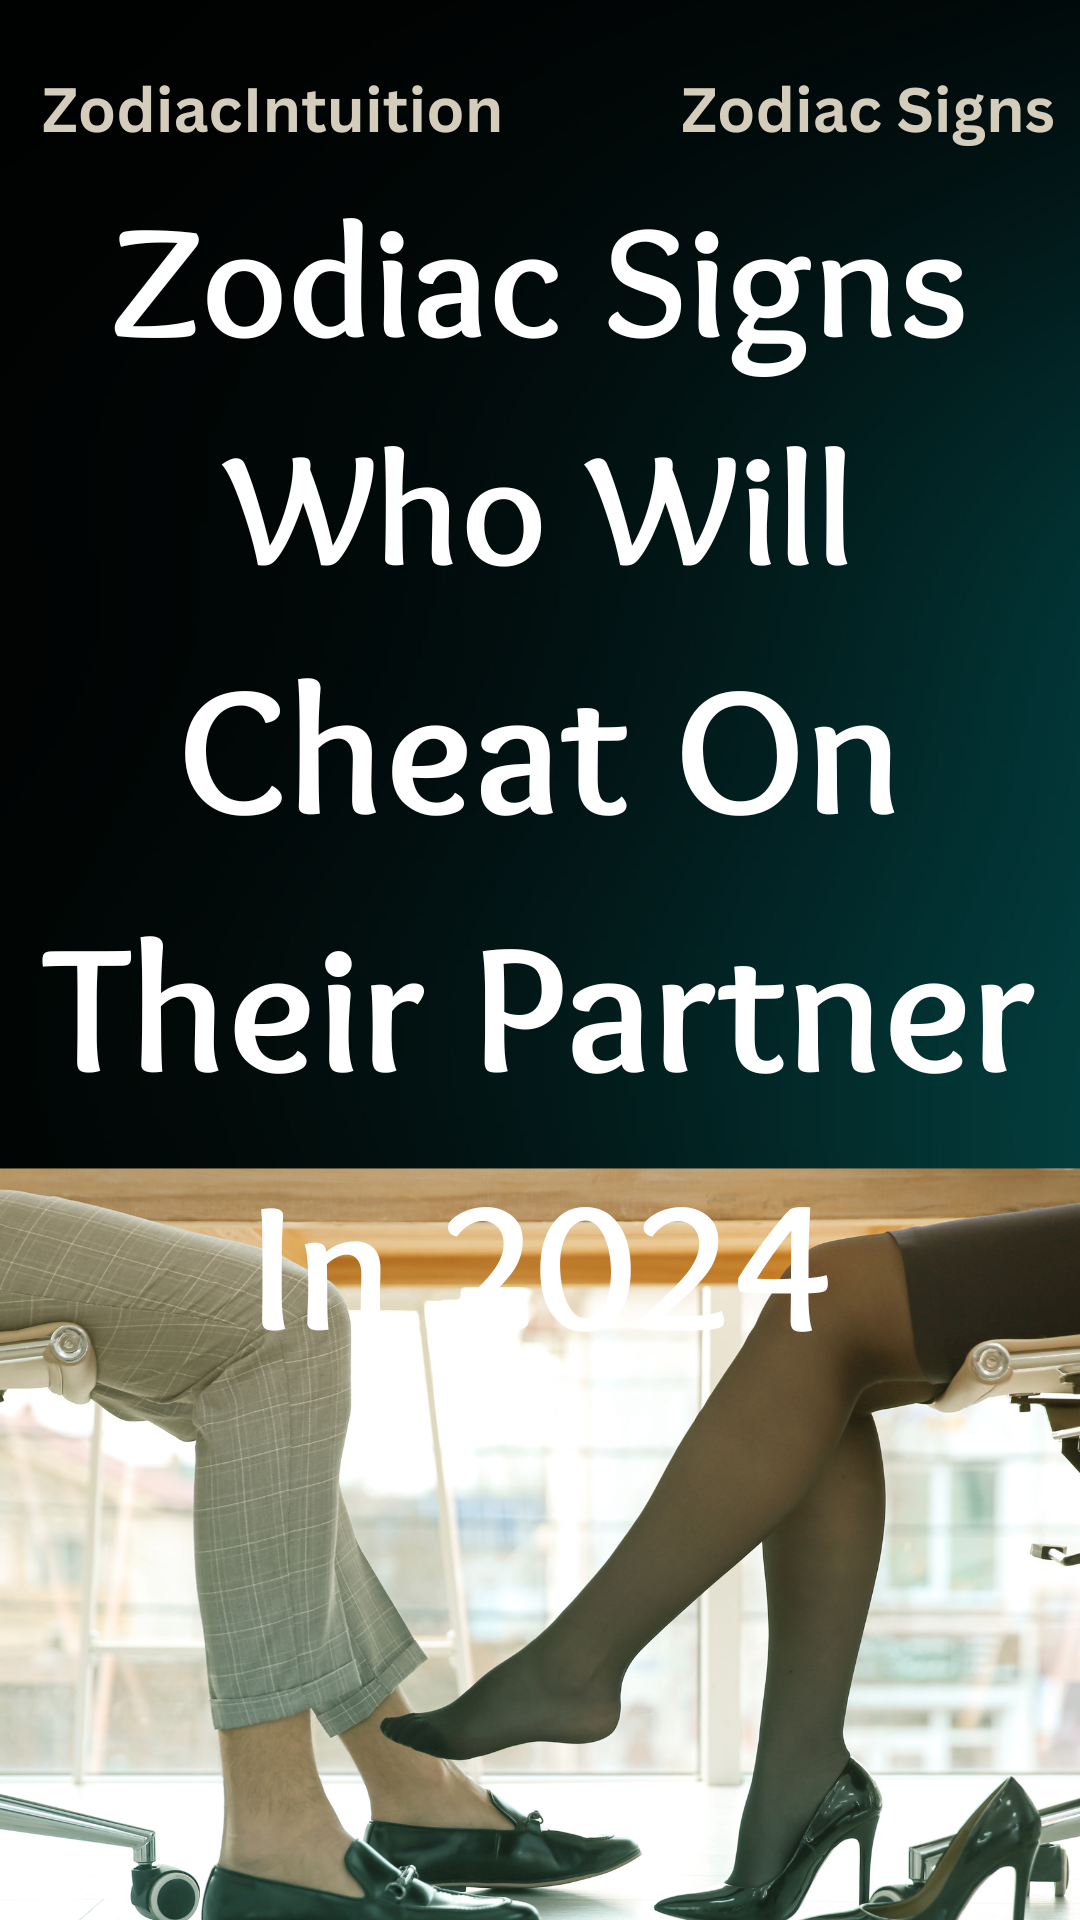 Zodiac Signs Who Will Cheat On Their Partner In 2024